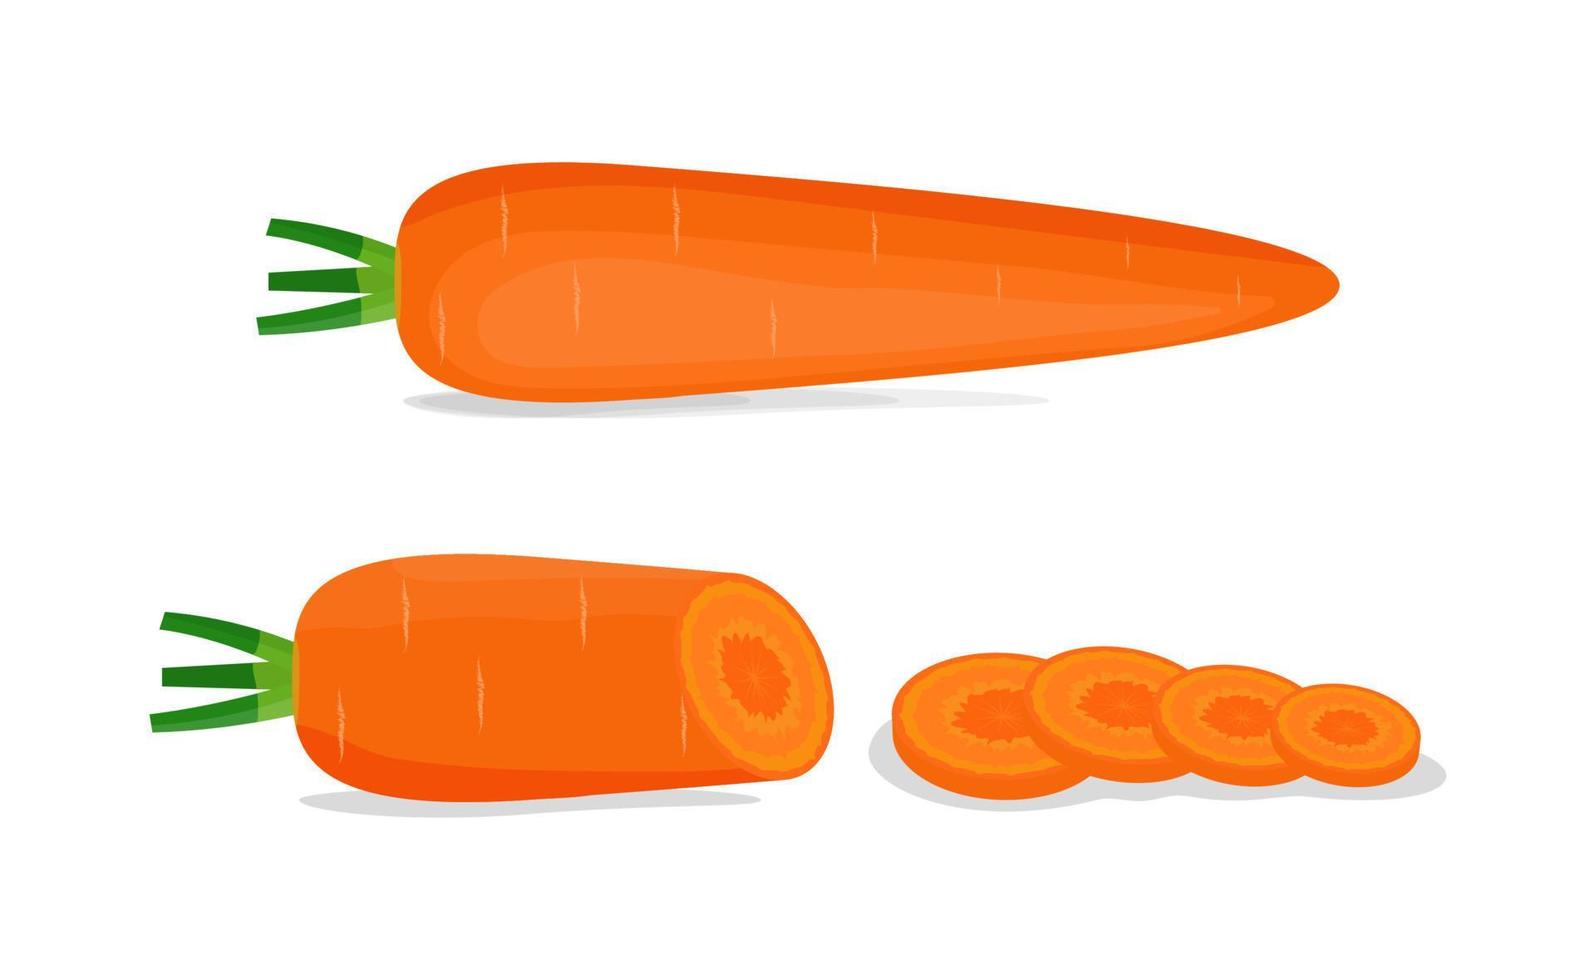 Carrot whole and sliced illustration vector